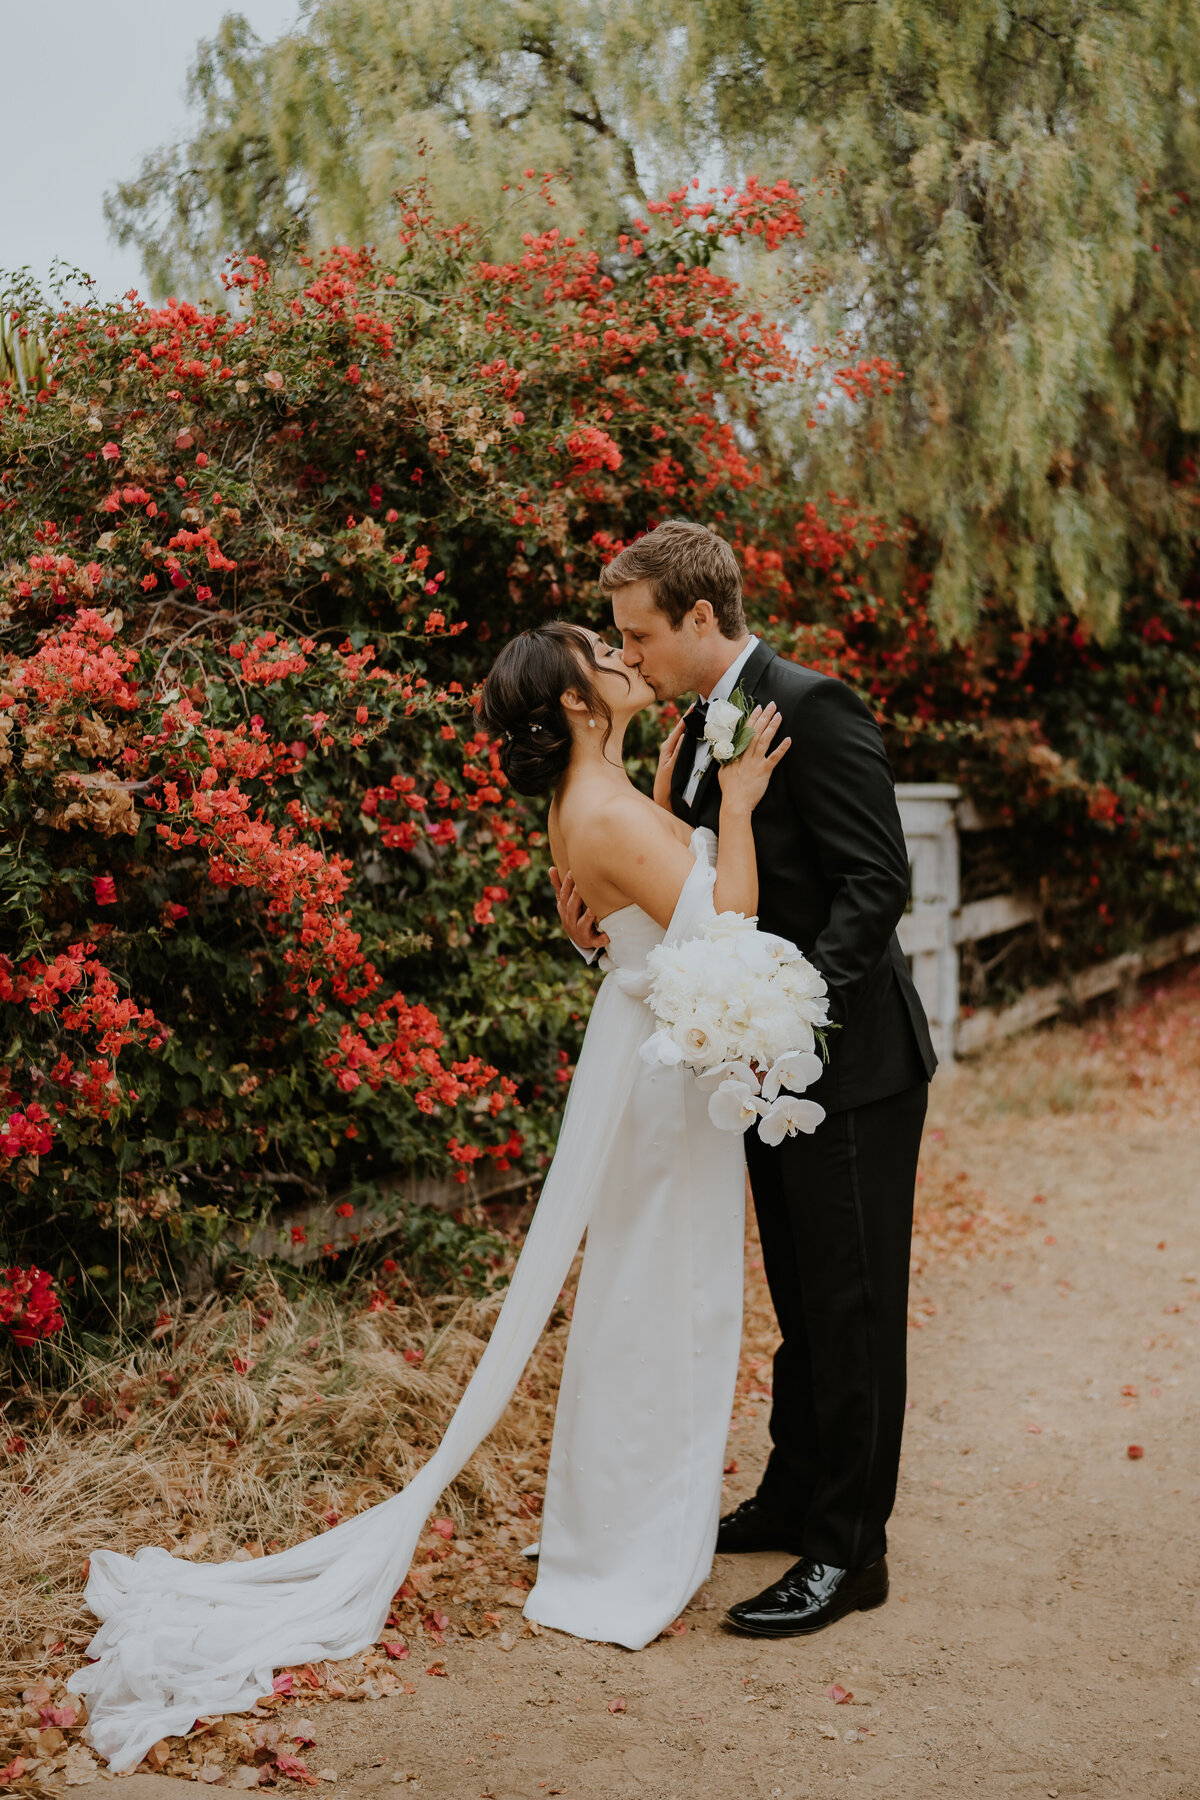 Temecula, California Wedding photographer Yescphotography Bride and Groom share kiss in front of beautiful flowers